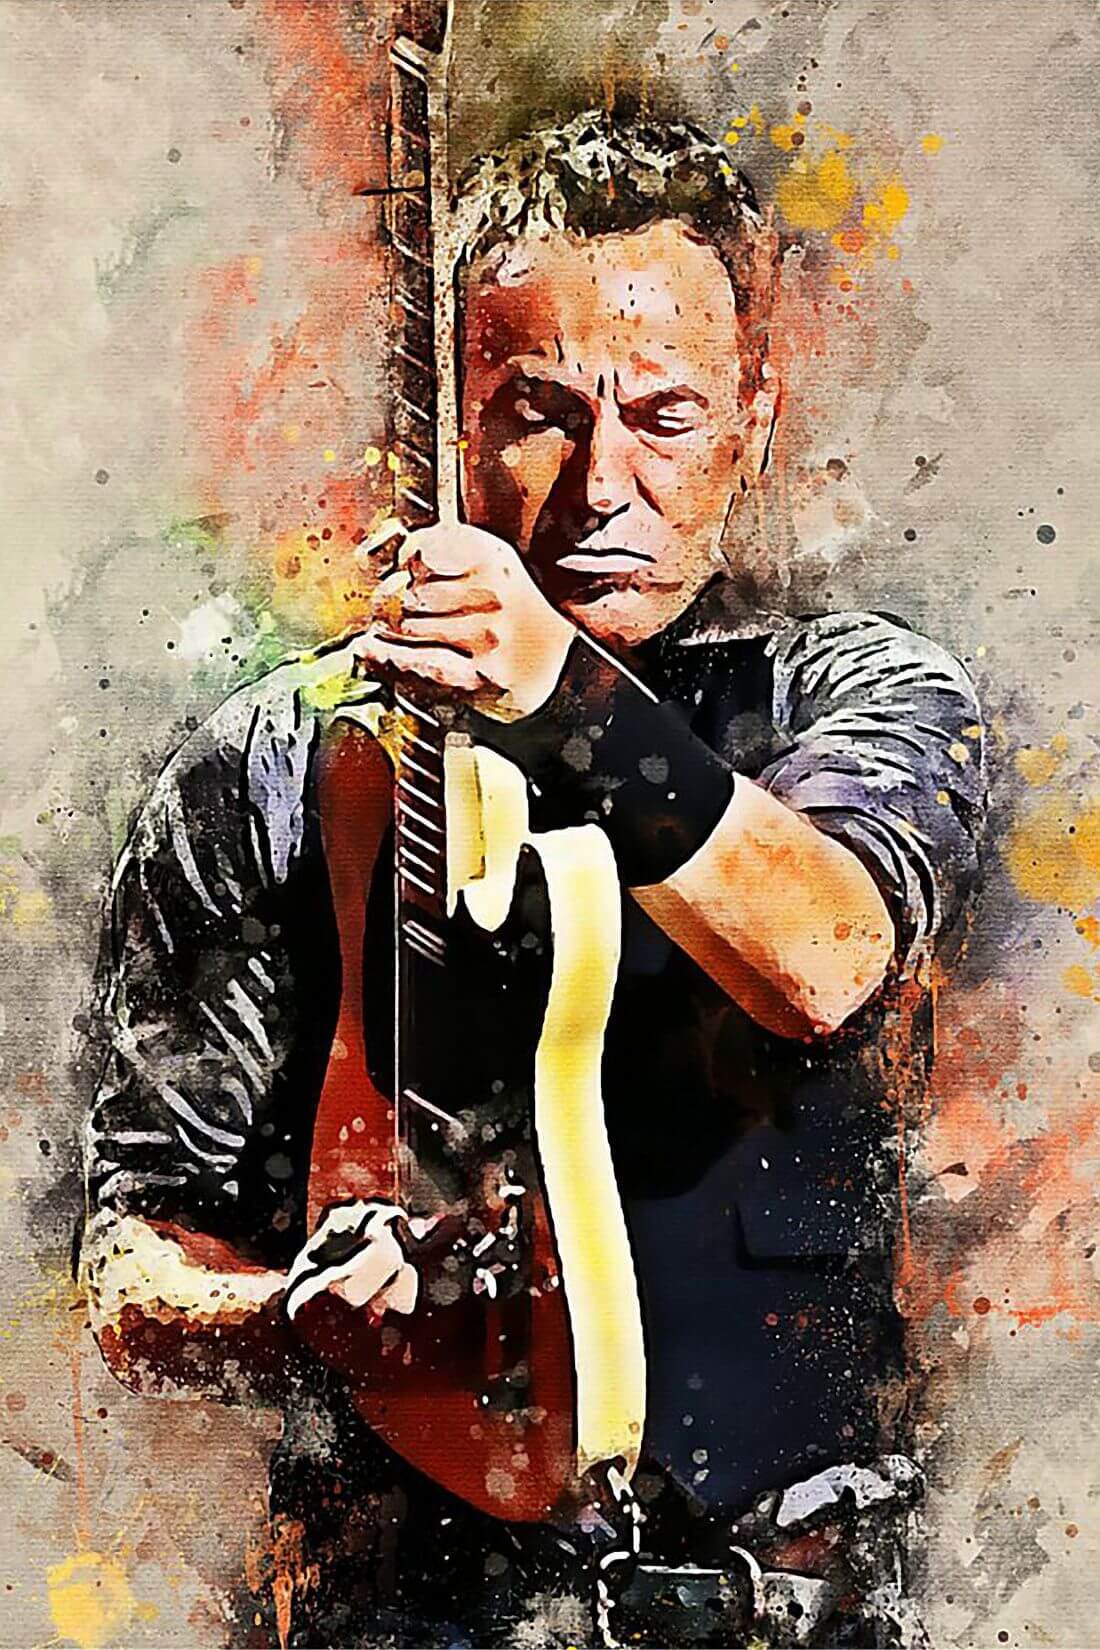 Bruce Springsteen - The Boss - Fan Art Painting Art Prints by Jerry | Buy Posters, Frames, Canvas & Art Prints | Small, Compact, Medium and Large Variants